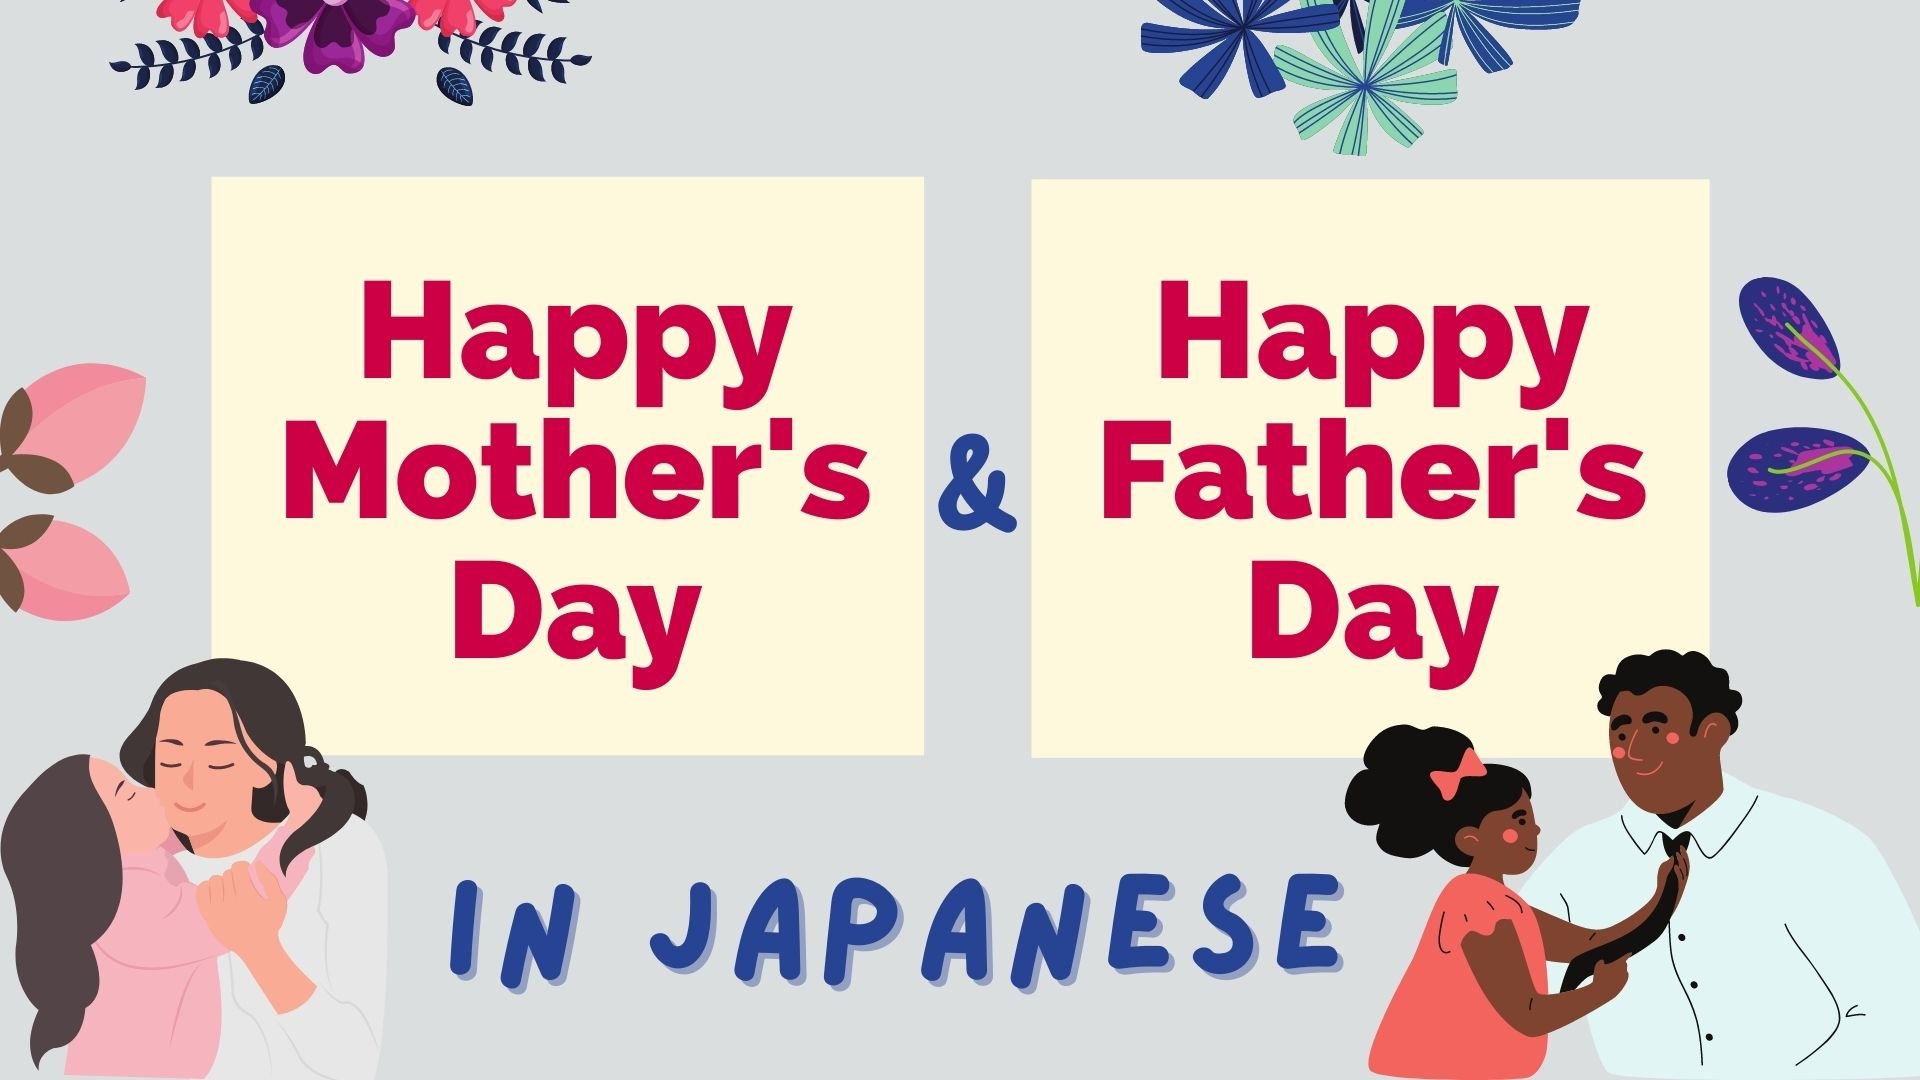 How To Say Happy Mother’s Day And Father’s Day In Japanese Lingalot